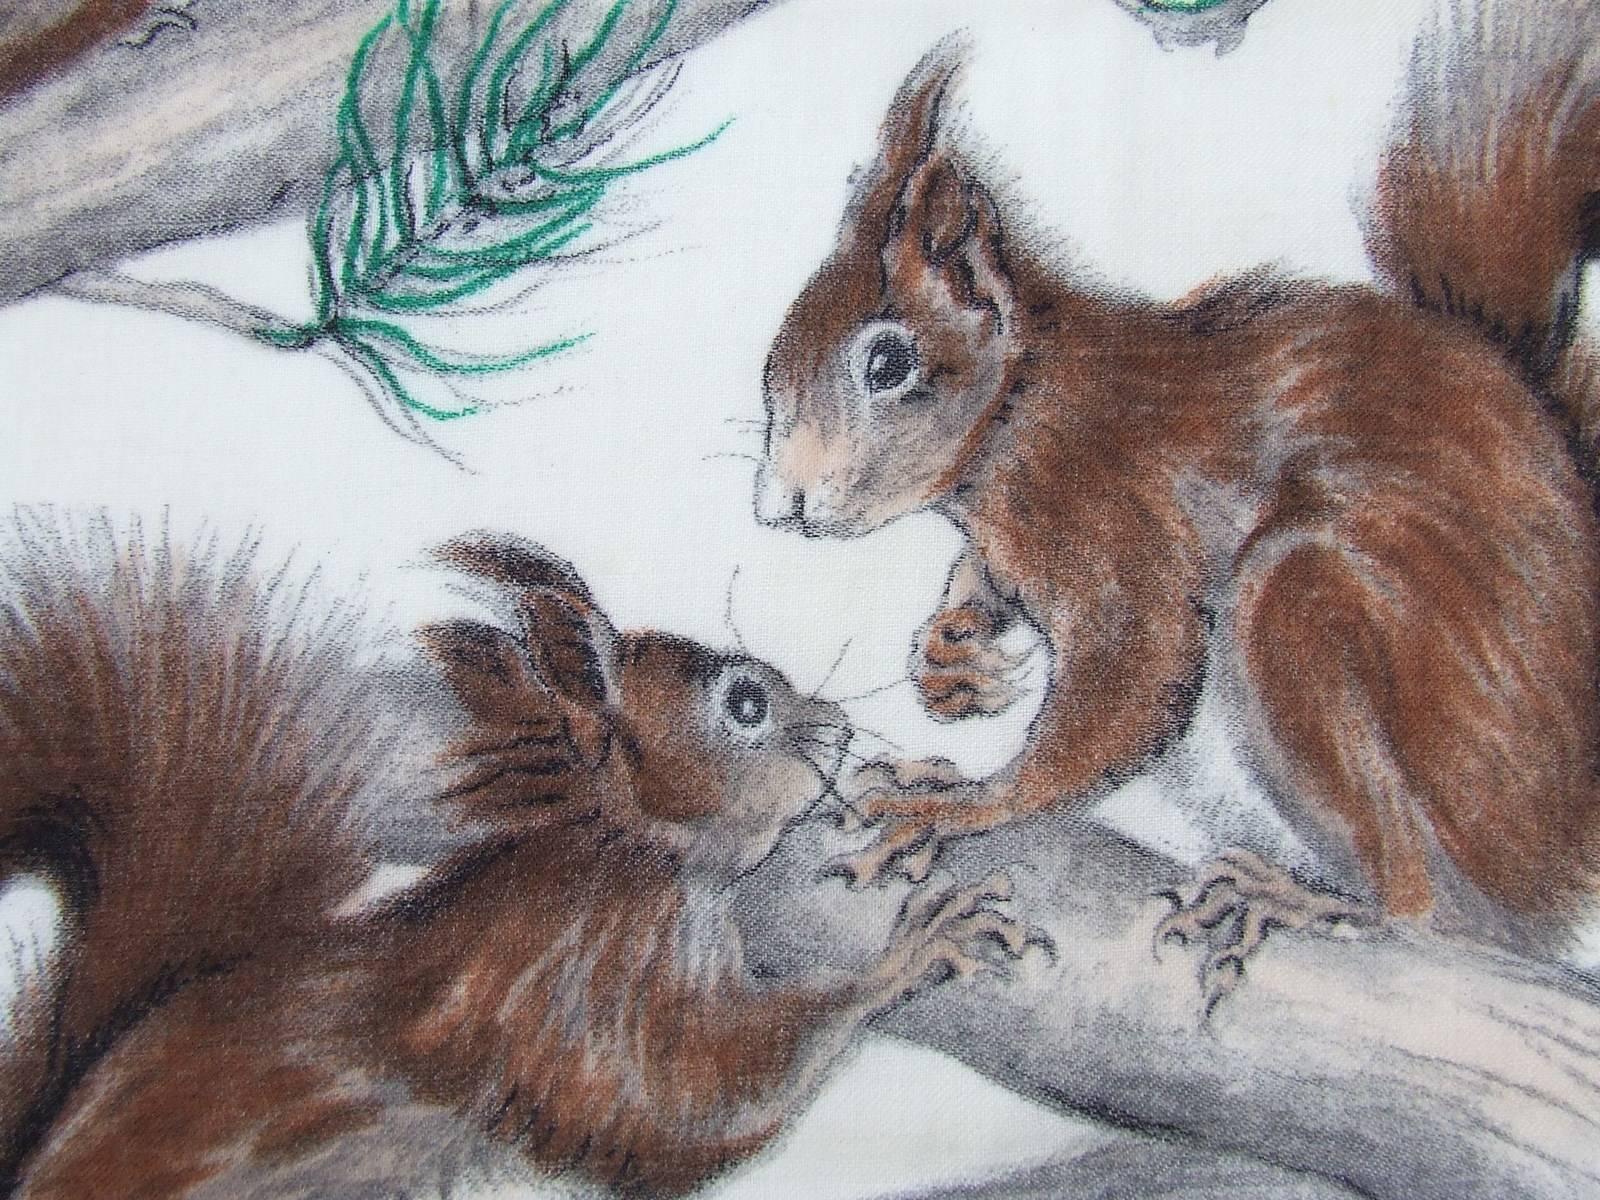 Beautiful Vintage KREIER Scarf

Pattern: Squirrels

Made in Switzerland

Designed by Xavier de Poret, Artist known for his amazing drawings of animals, close to reality

Made of fine Wool

Colorway: Yellow Beige Background, Brown